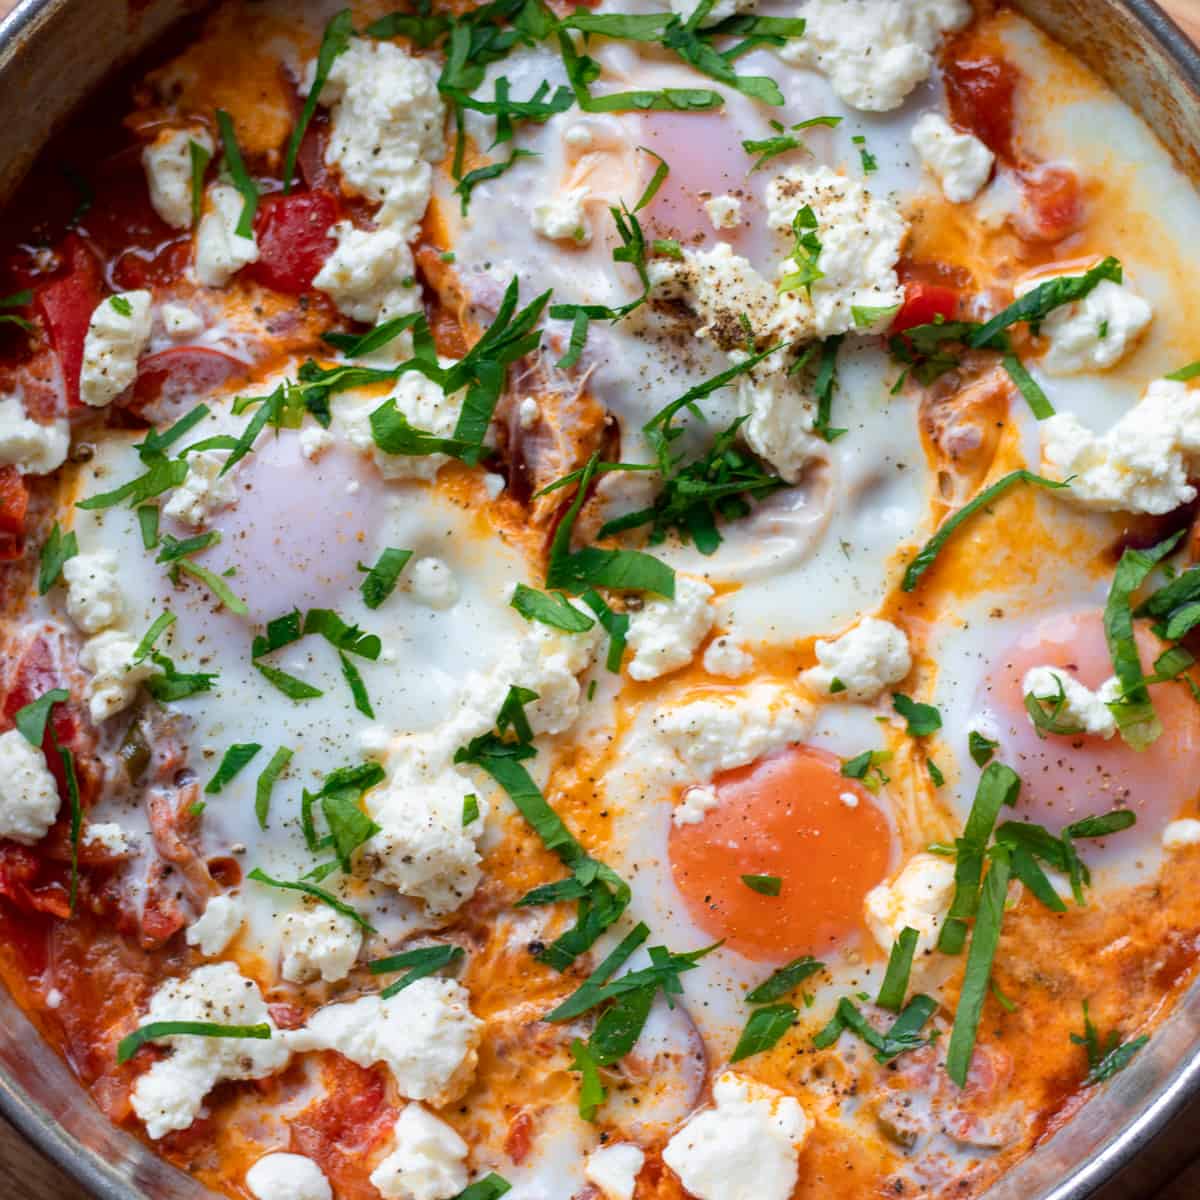 Traditional Shakshuka served with feta and herbs